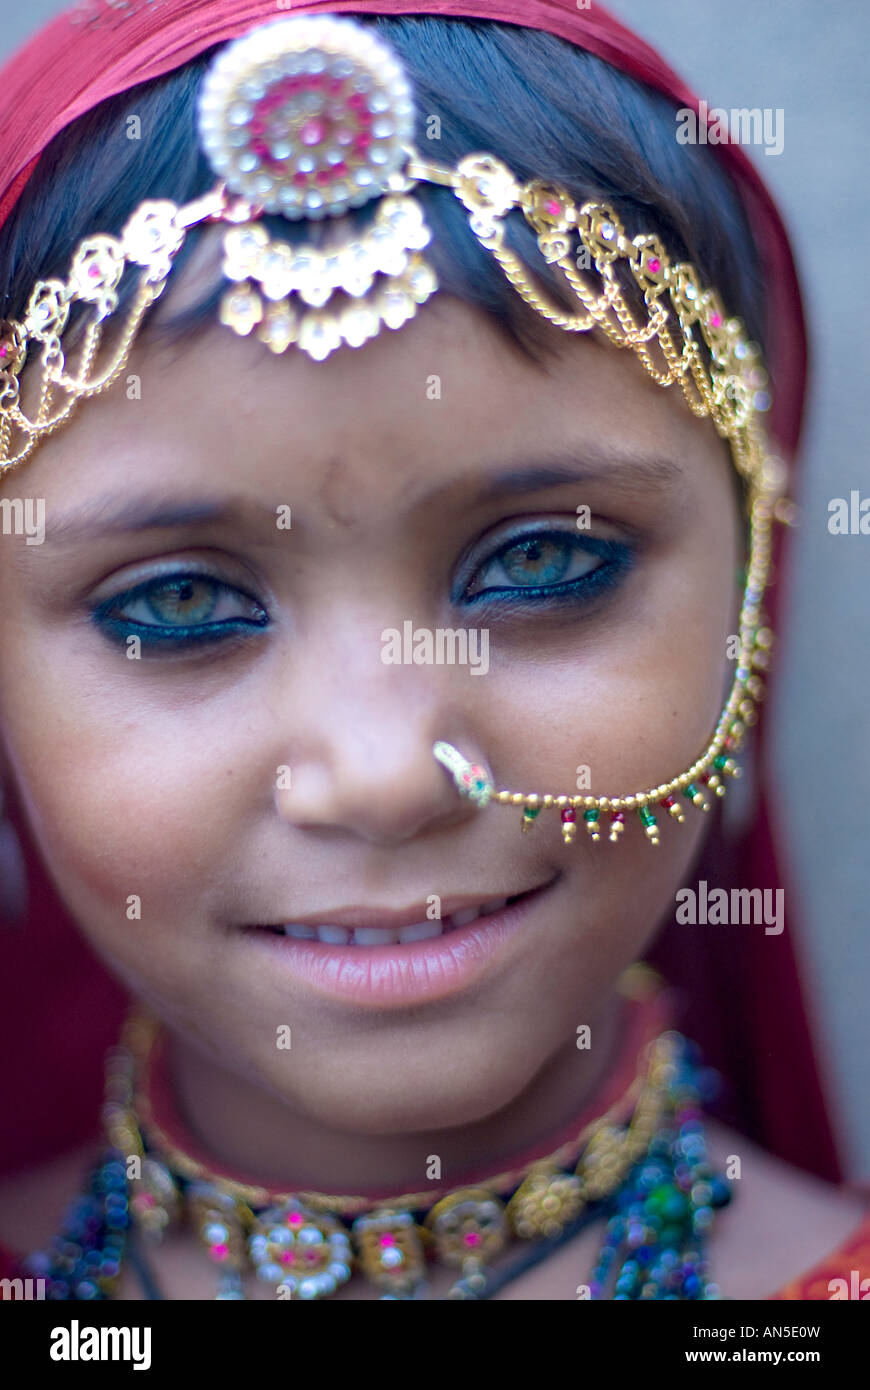 Portrait of a smiling gypsy girl from Rajasthan, India.